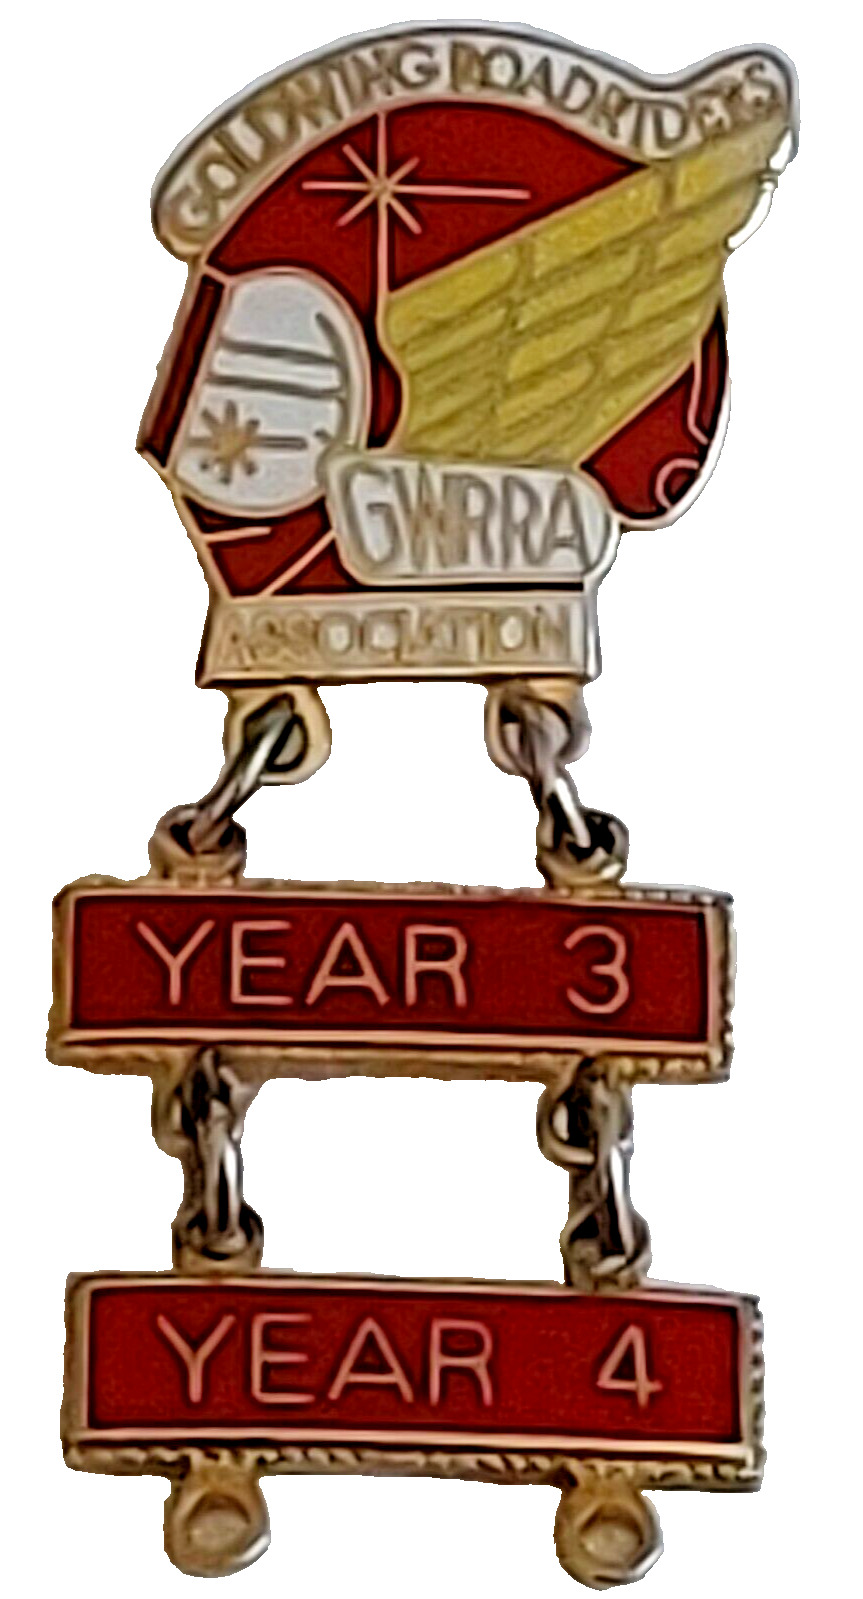 GWRRA (Gold Wing Road Riders Association) 3 & 4 Years Screwback Pin